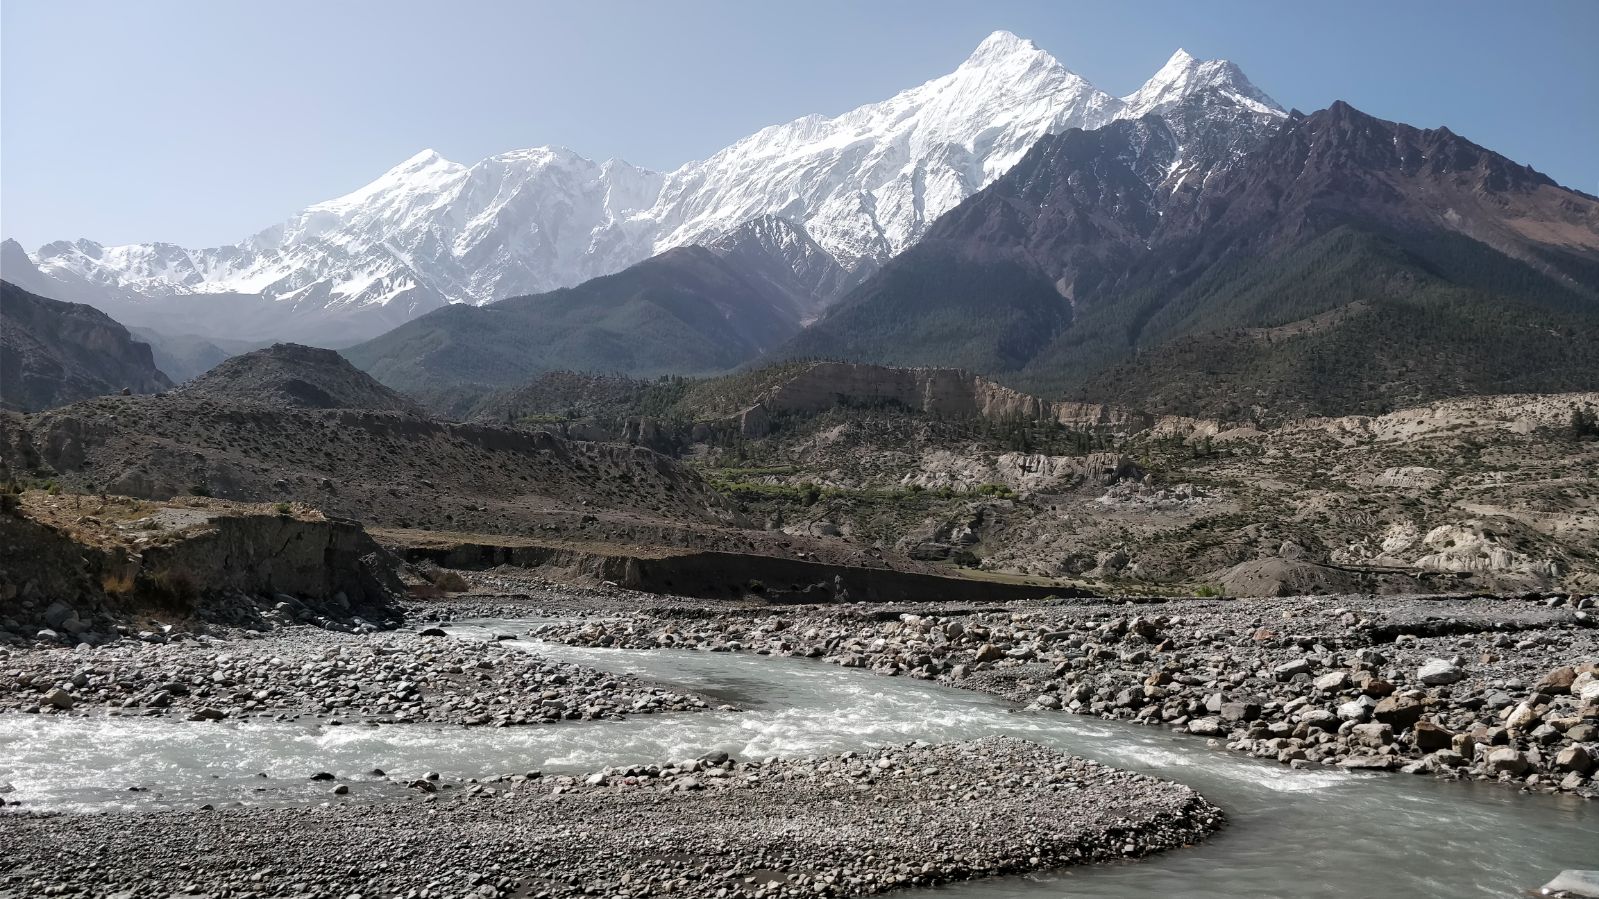 Photos from our research tour currently taking place in Nepal